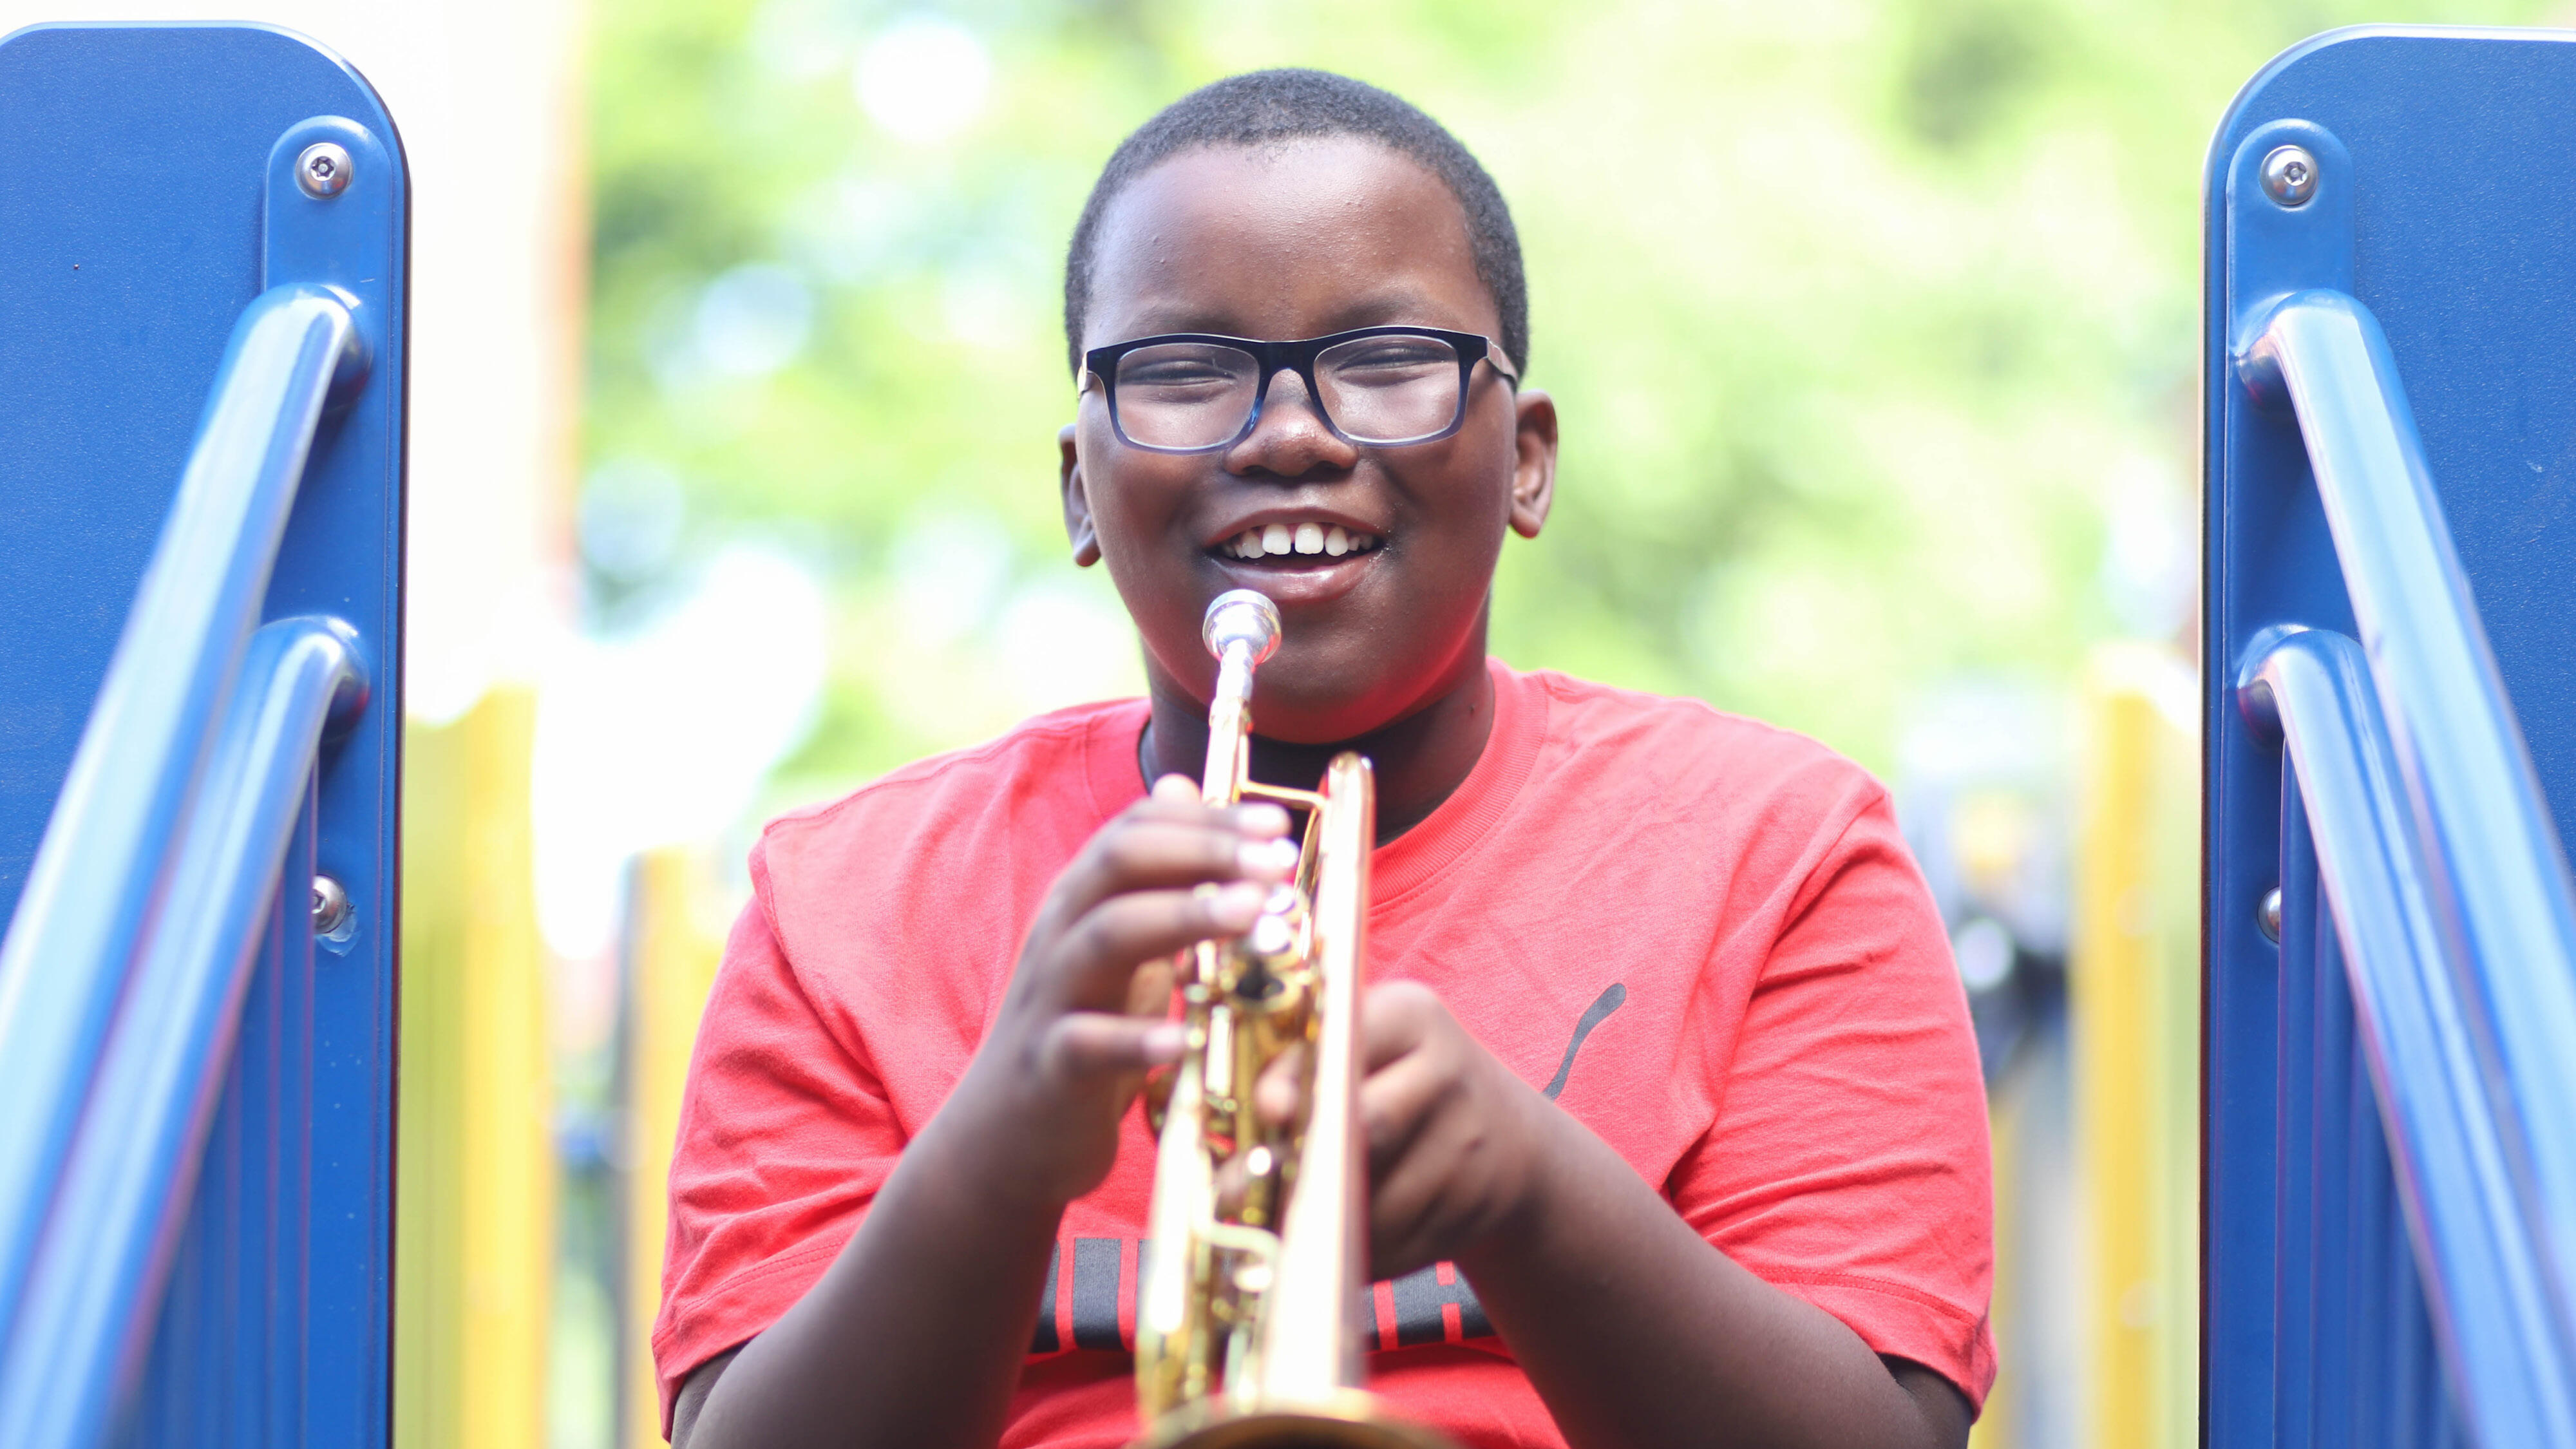 Student smiling and holding a trumpet